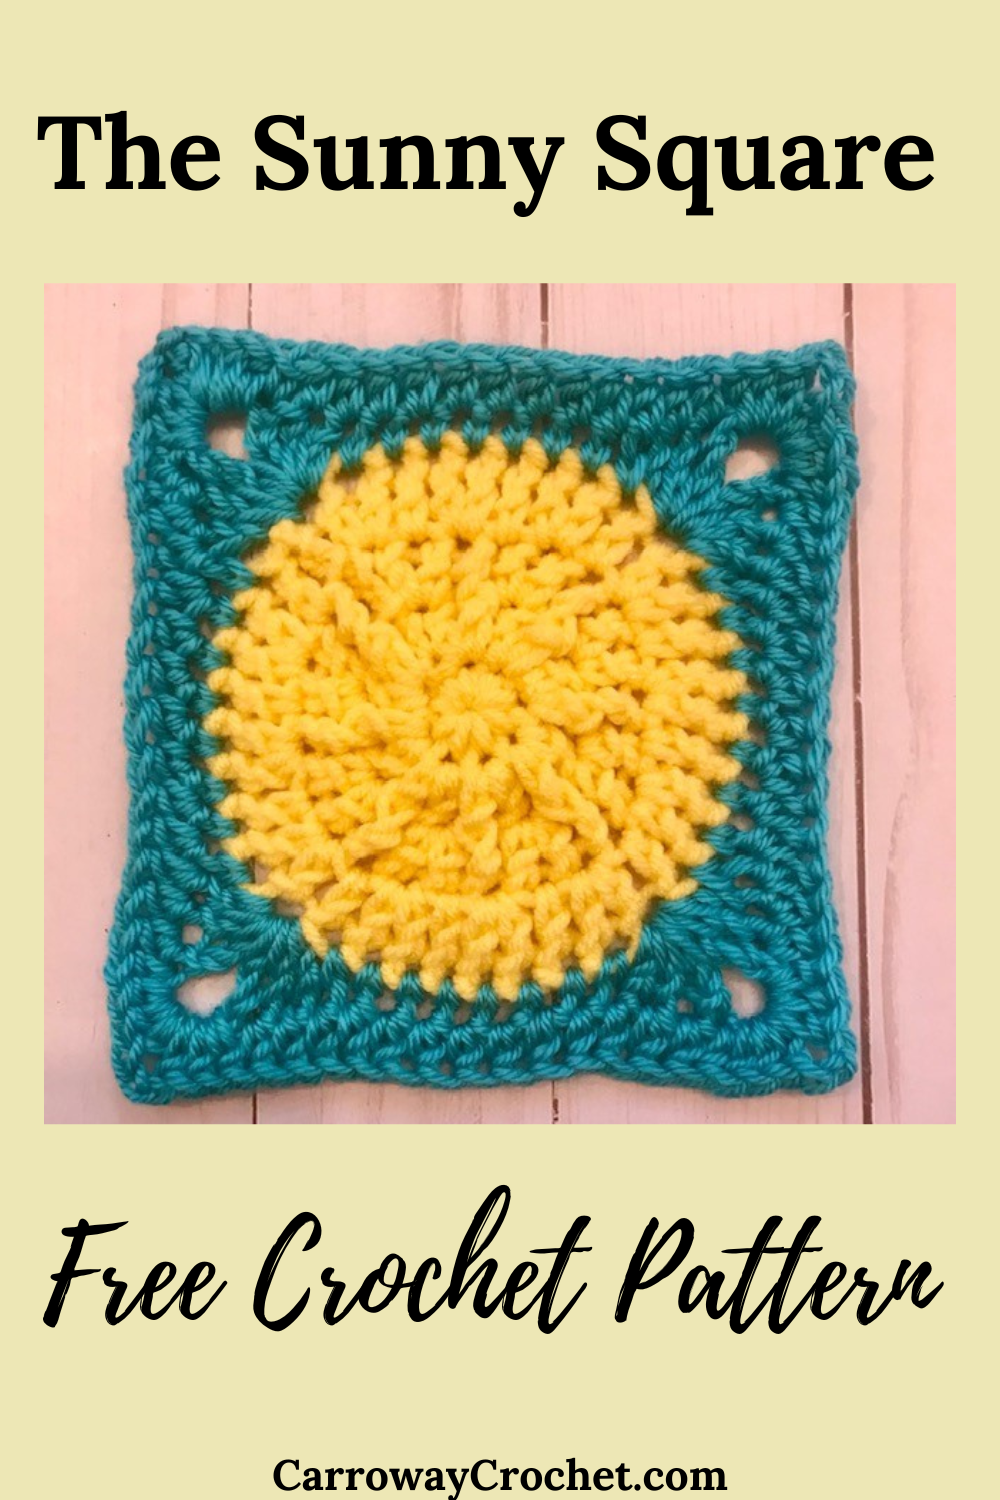 Granny square book review roundup - Underground Crafter